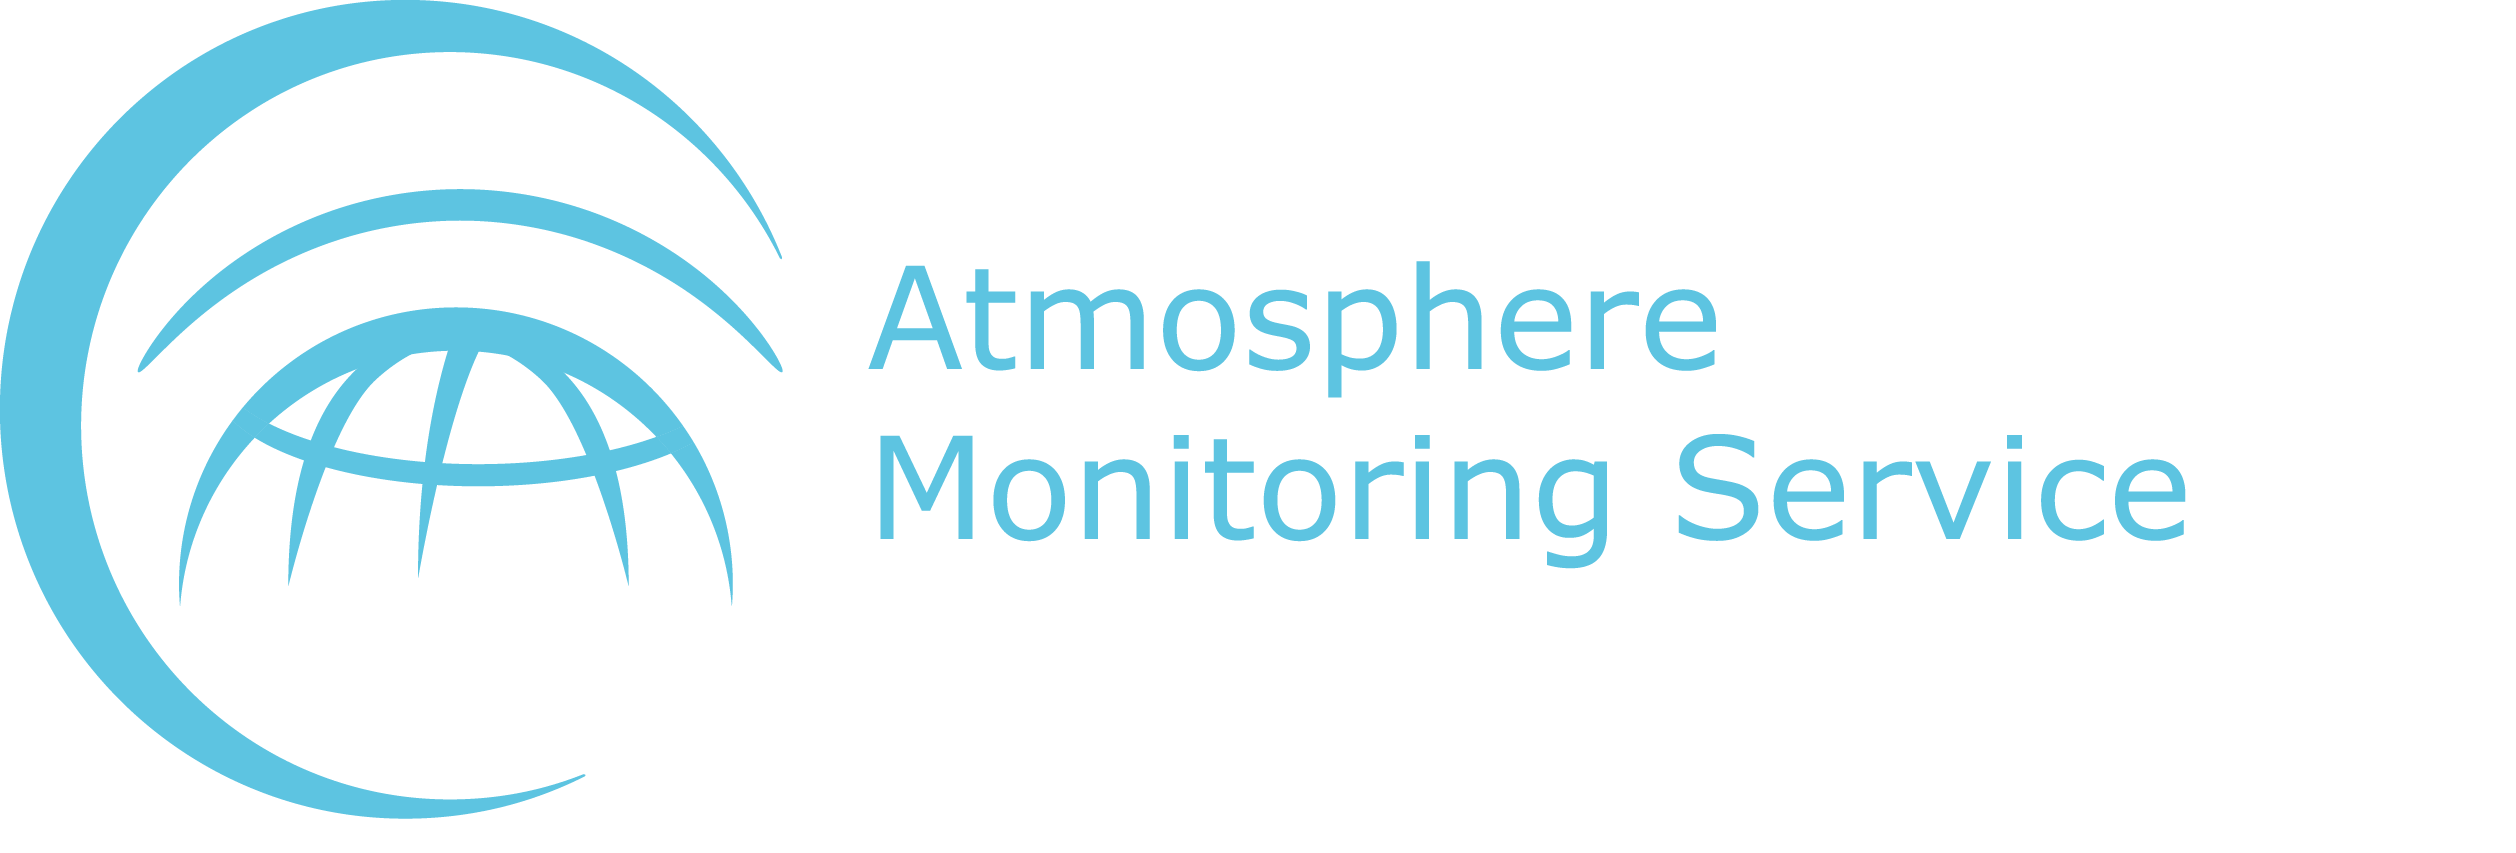 Atmosphere Monitoring Service